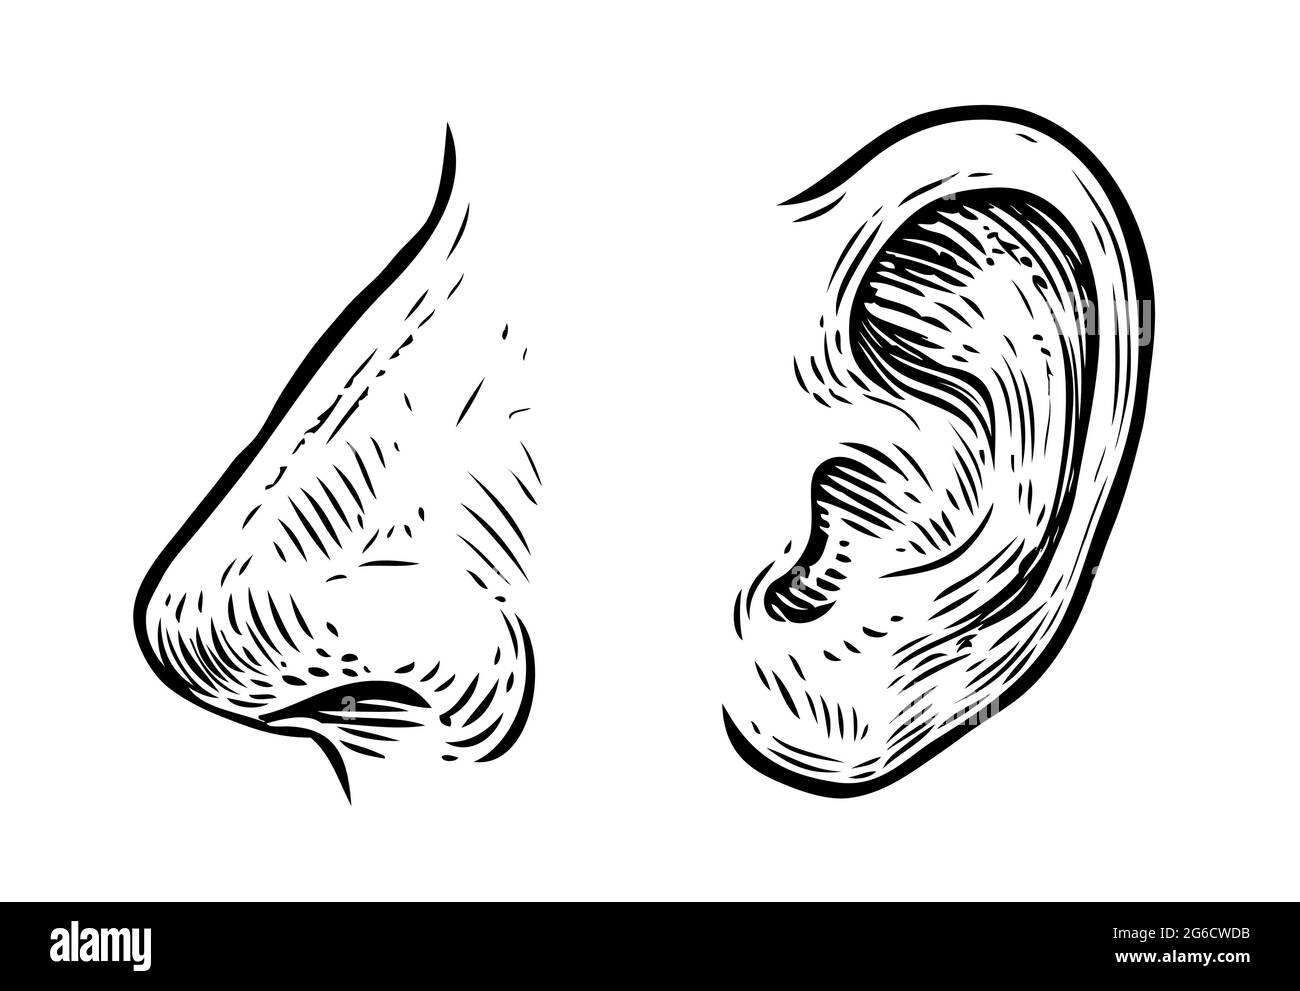 Human nose, ear sketch. Hand drawn illustration in vintage engraving style Stock Vector